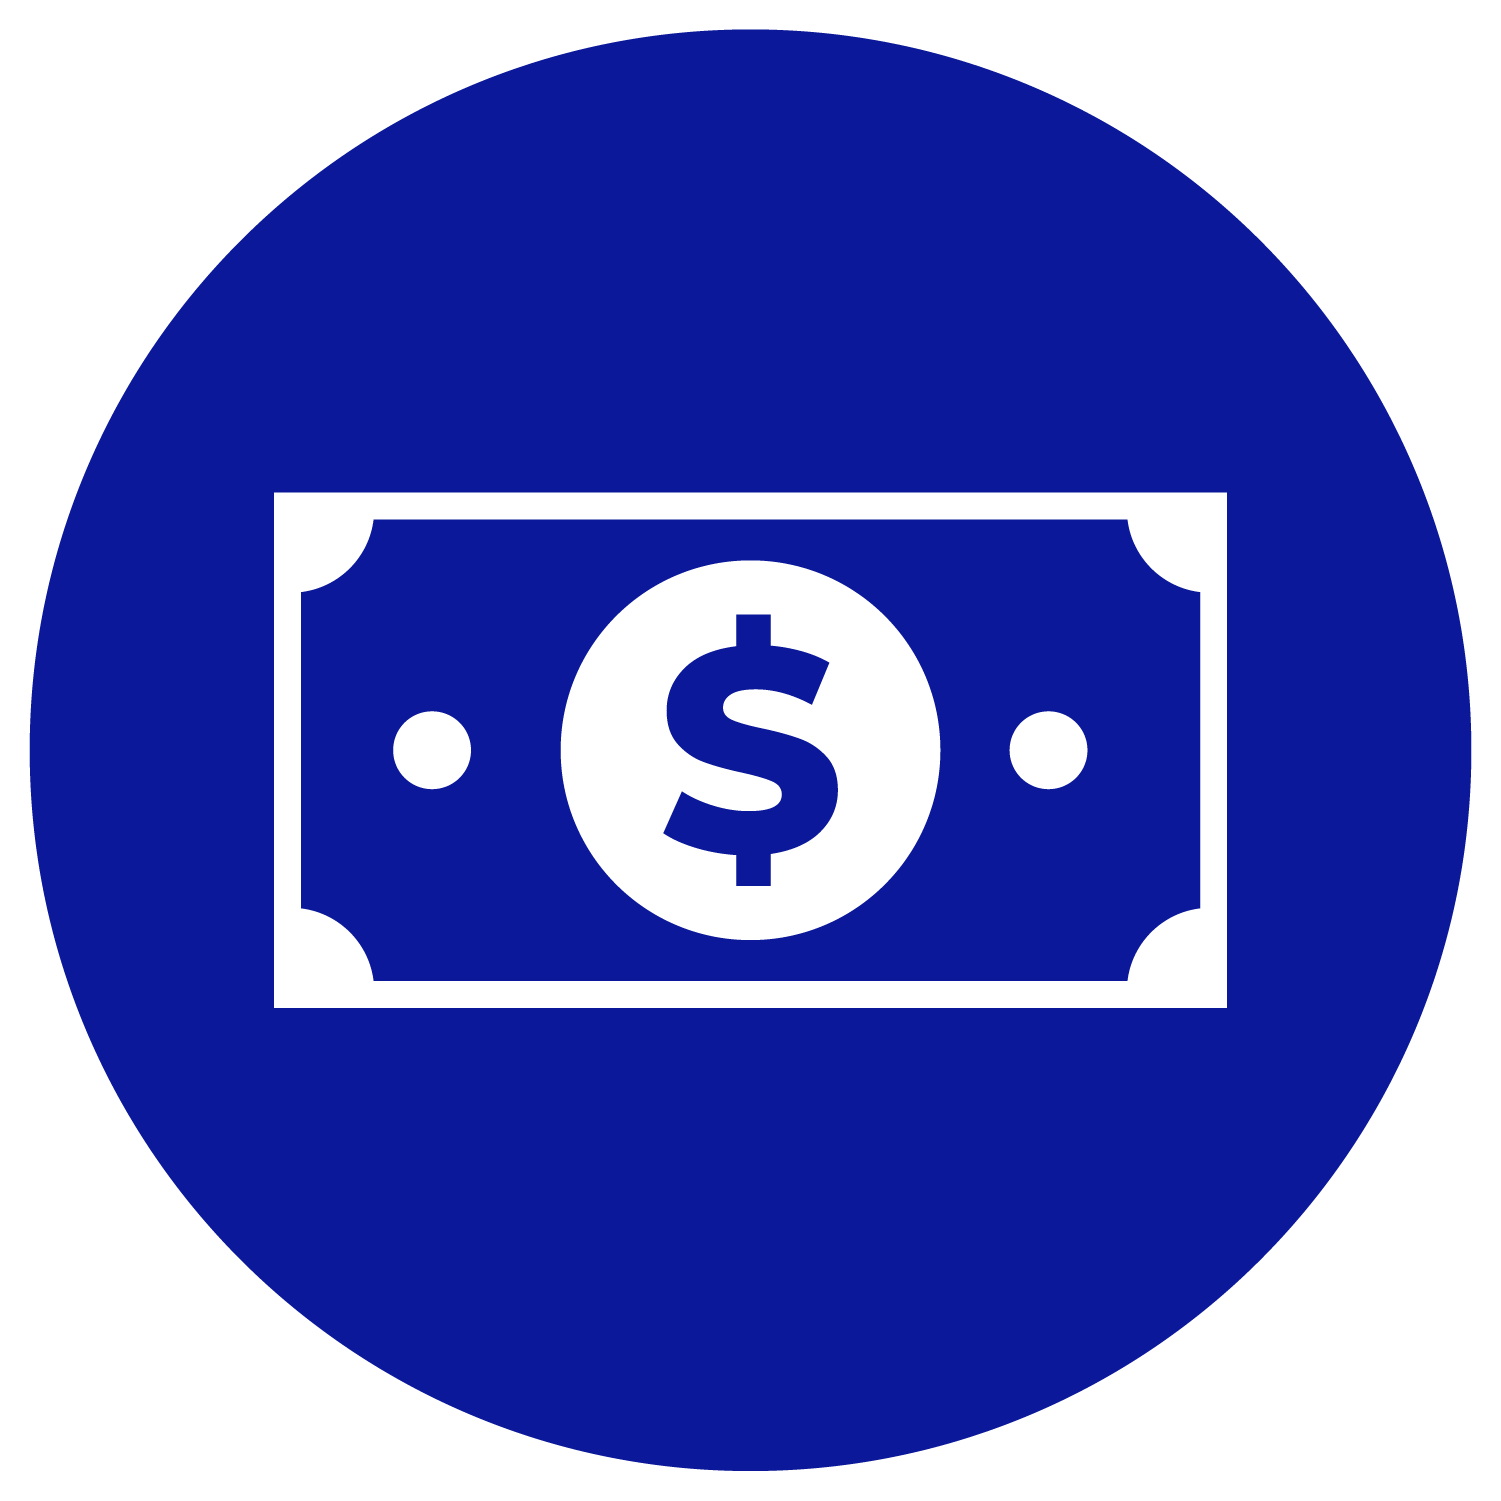 circular blue icon with a white, rectangular bill shape, featuring an inner white circle with a blue dollar sign